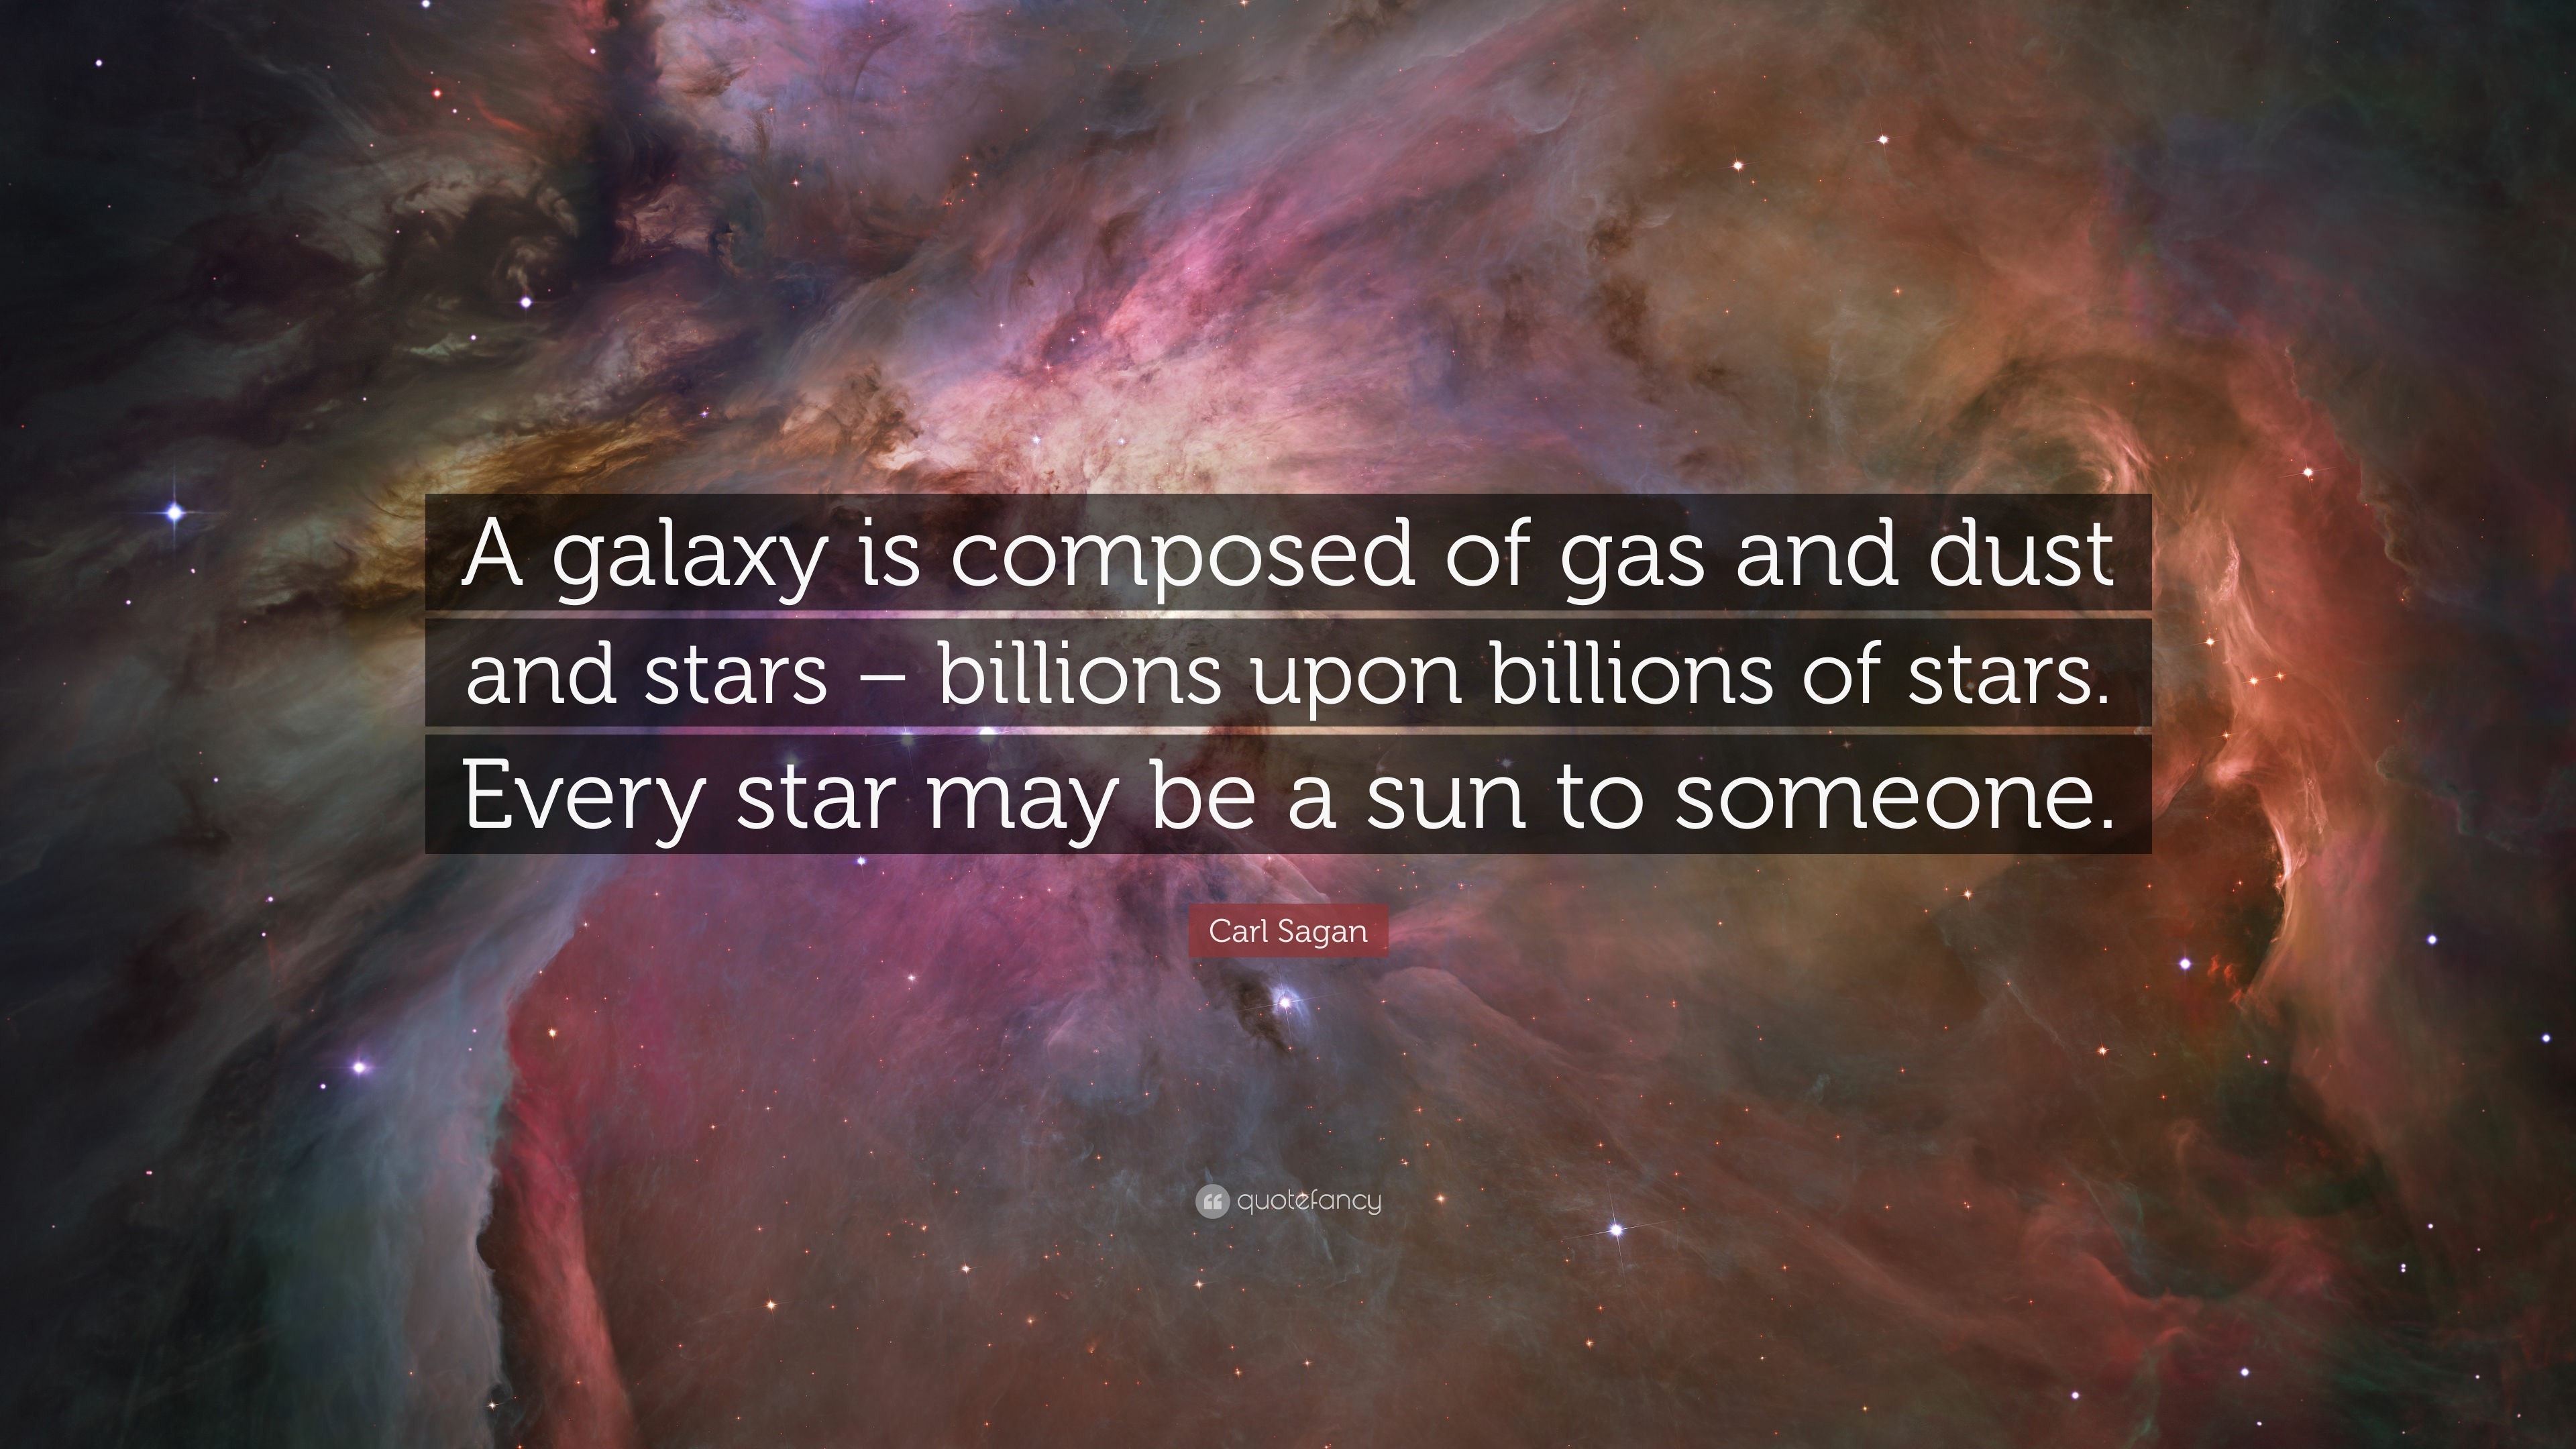 87599-Carl-Sagan-Quote-A-galaxy-is-composed-of-gas-and-dust-and-stars.jpg